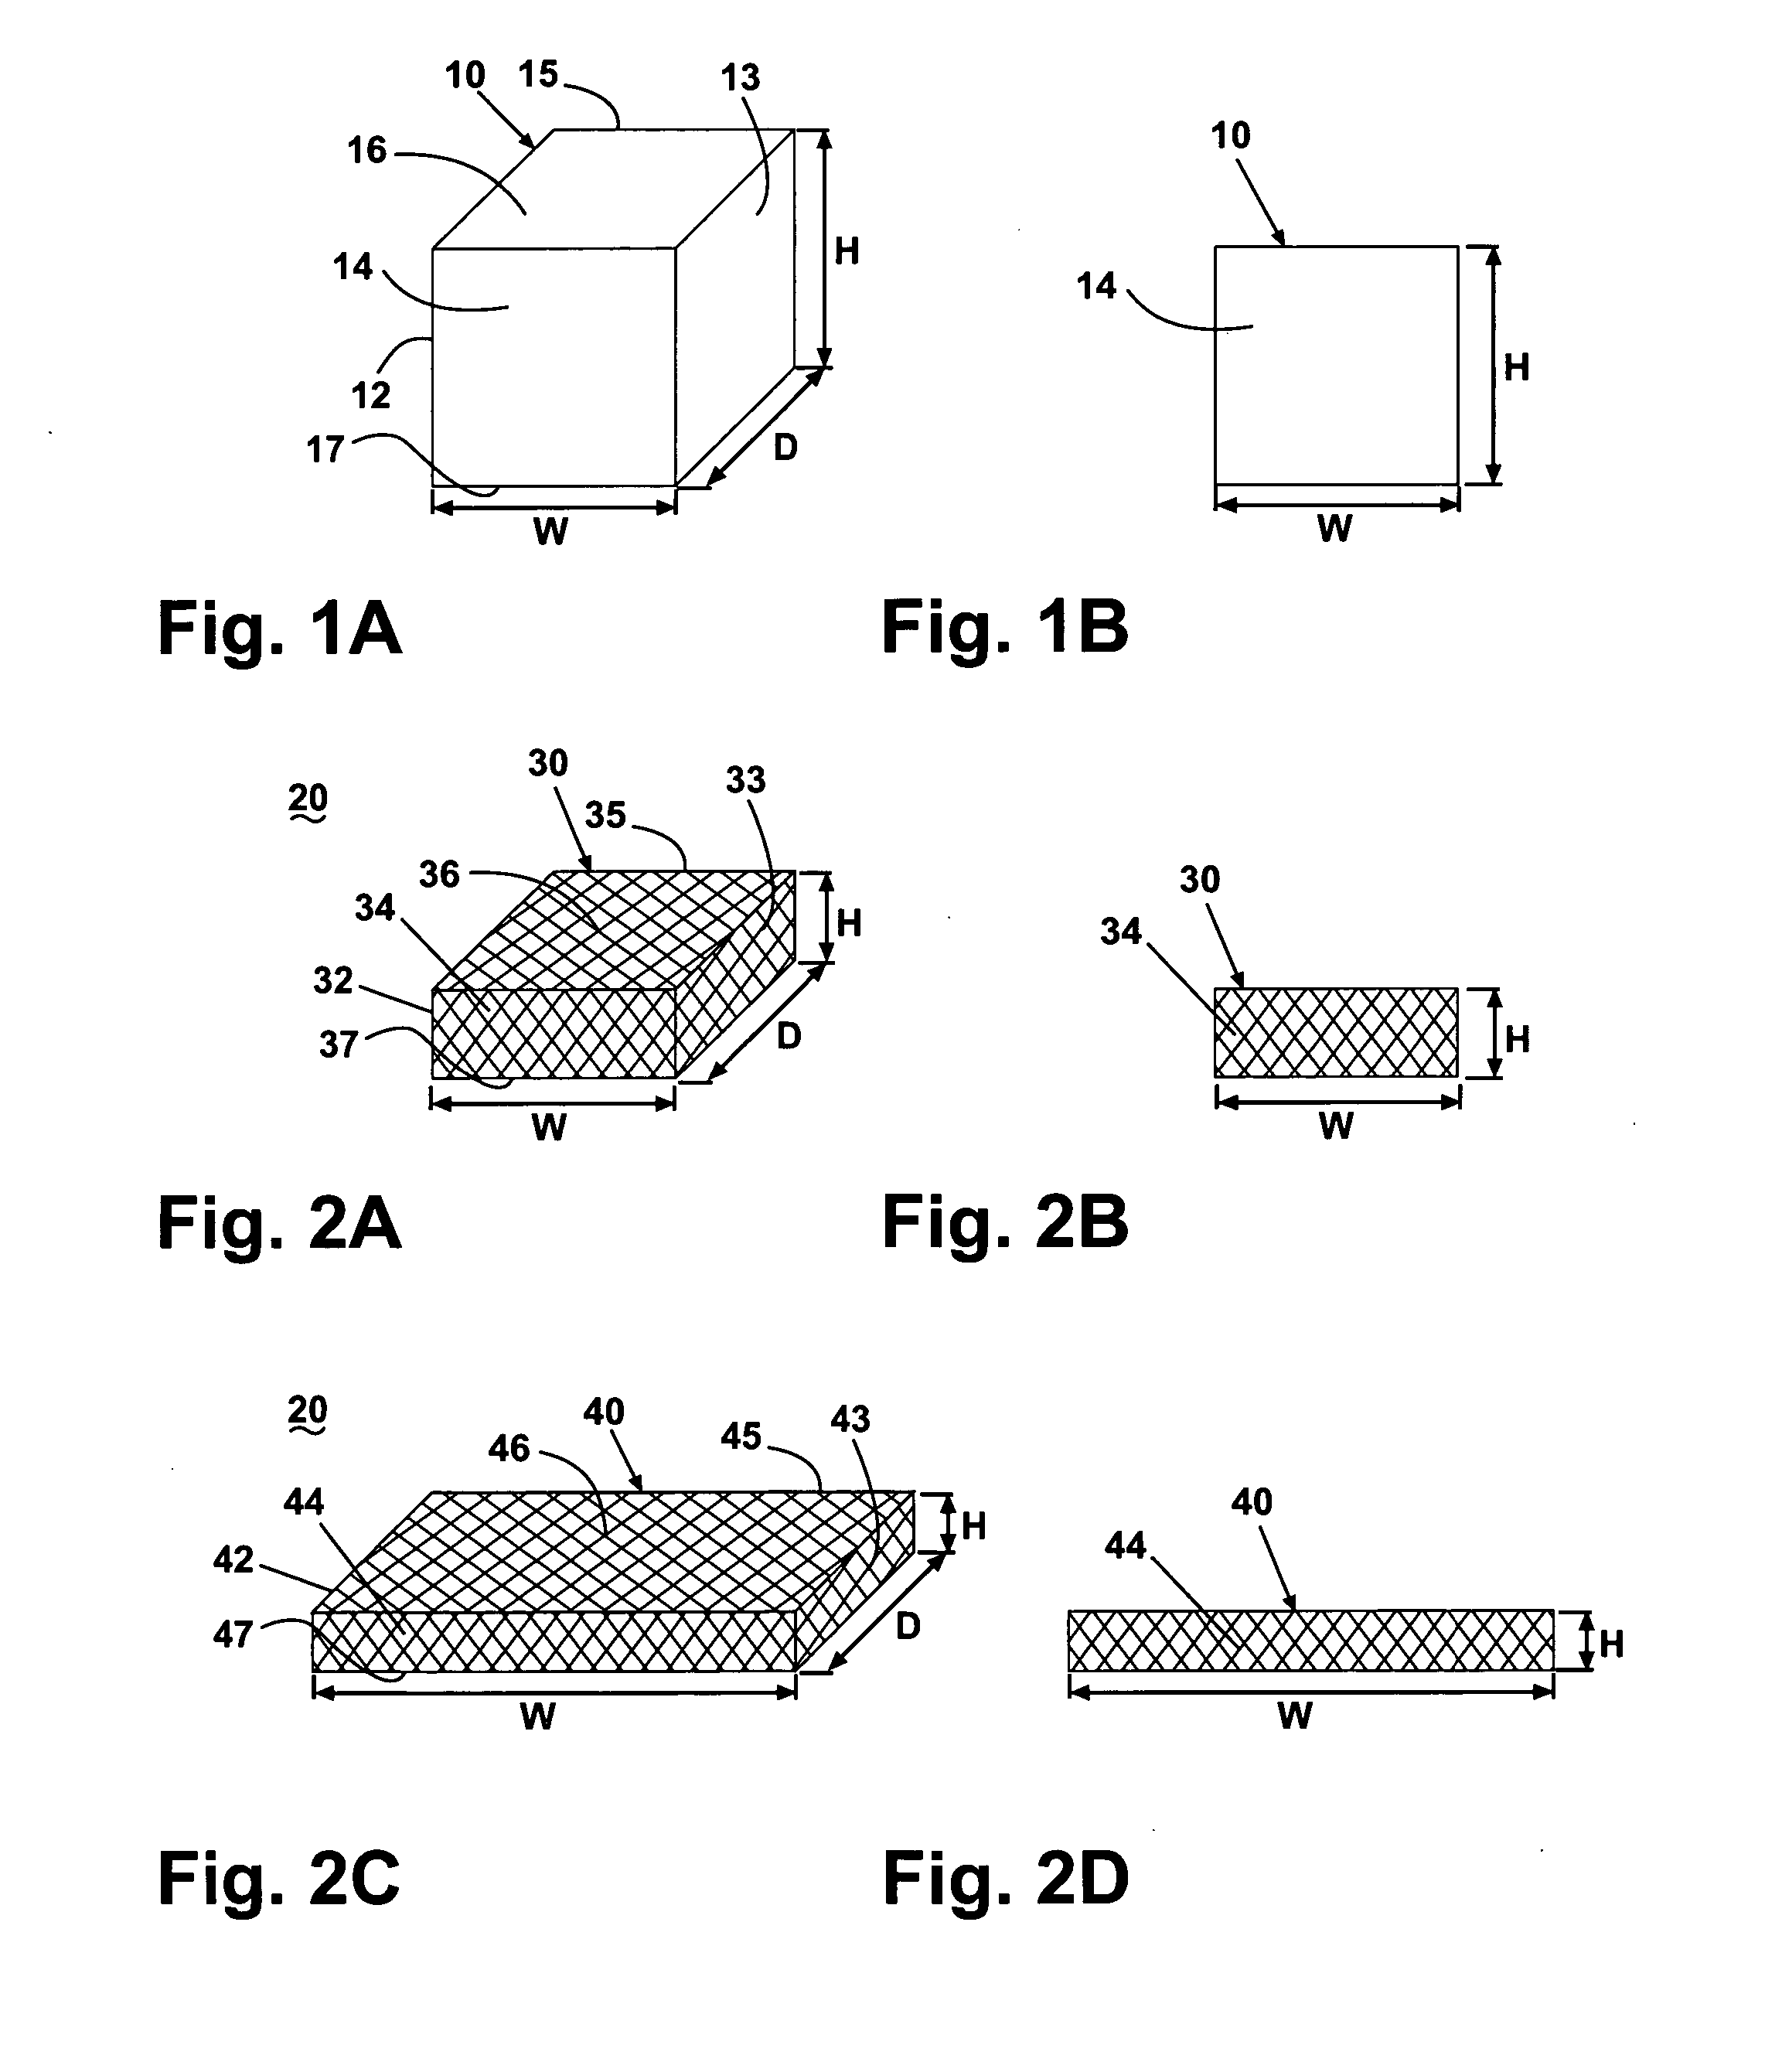 Modular laundry system with horizontal module spanning two laundry appliances